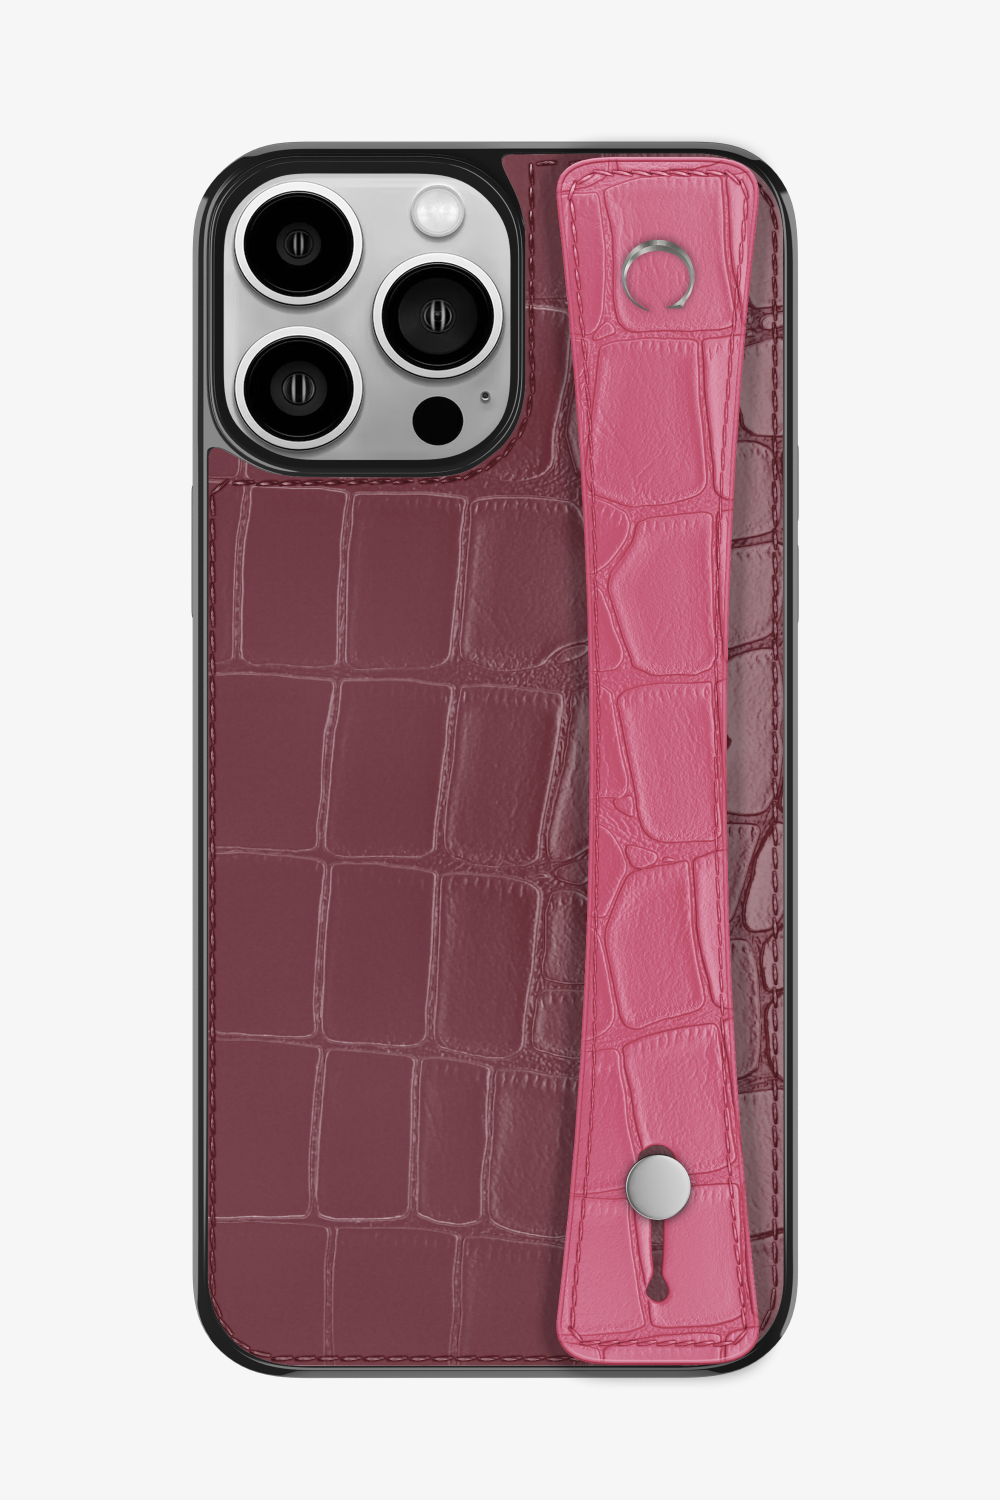 Alligator Sports Strap Case for iPhone 14 Pro Max - Burgundy / Pink - zollofrance